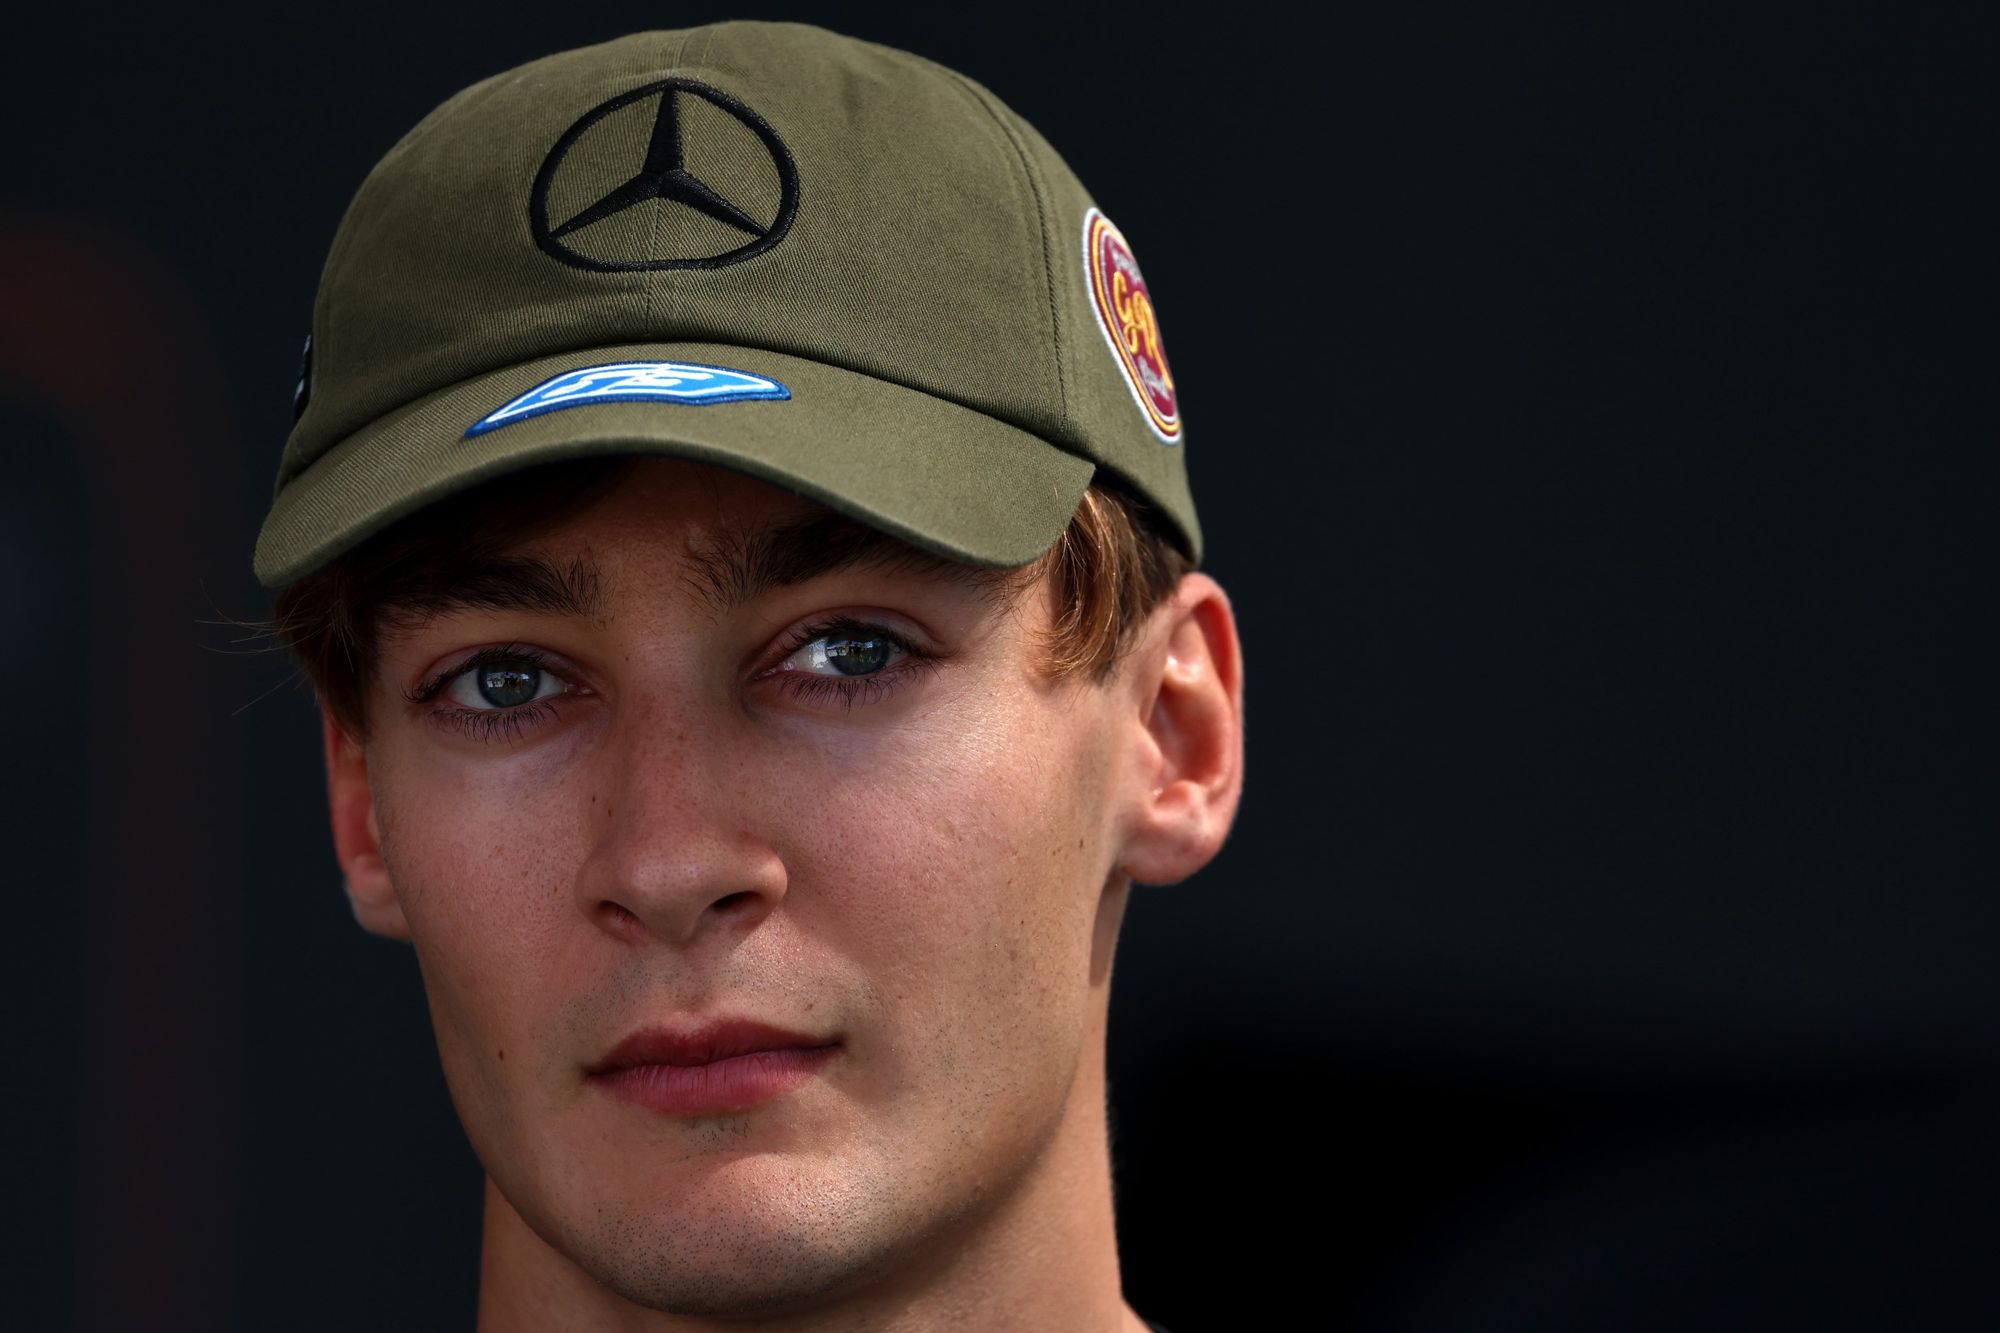 George Russell, Mercedes, F1